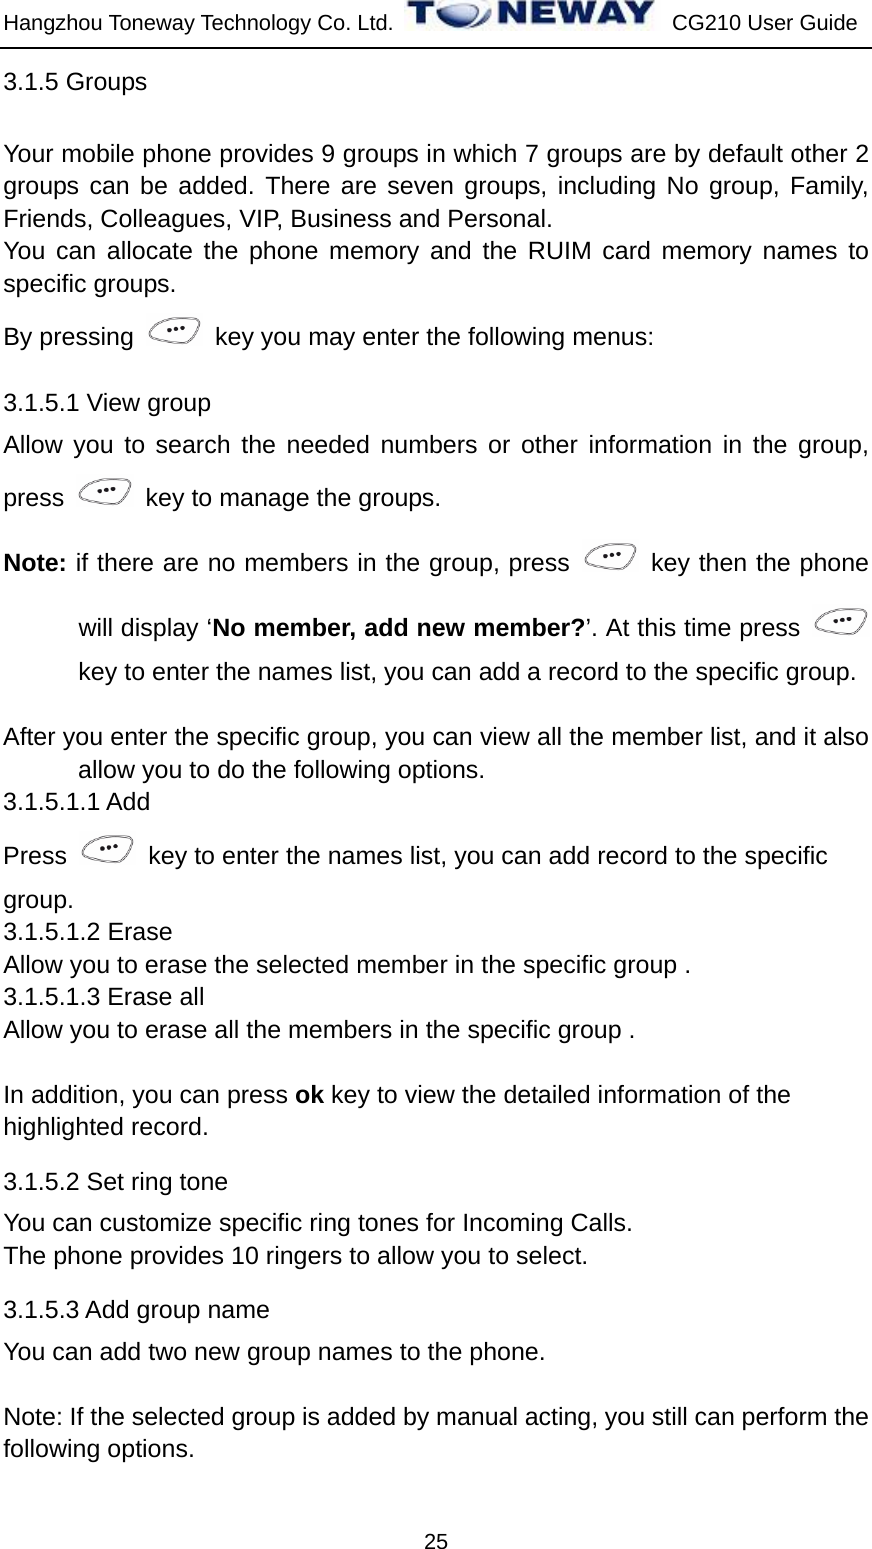 Hangzhou Toneway Technology Co. Ltd.    CG210 User Guide 25 3.1.5 Groups   Your mobile phone provides 9 groups in which 7 groups are by default other 2 groups can be added. There are seven groups, including No group, Family, Friends, Colleagues, VIP, Business and Personal. You can allocate the phone memory and the RUIM card memory names to specific groups. By pressing    key you may enter the following menus: 3.1.5.1 View group Allow you to search the needed numbers or other information in the group, press    key to manage the groups. Note: if there are no members in the group, press    key then the phone will display ‘No member, add new member?’. At this time press   key to enter the names list, you can add a record to the specific group.    After you enter the specific group, you can view all the member list, and it also allow you to do the following options. 3.1.5.1.1 Add   Press    key to enter the names list, you can add record to the specific   group. 3.1.5.1.2 Erase Allow you to erase the selected member in the specific group . 3.1.5.1.3 Erase all Allow you to erase all the members in the specific group .    In addition, you can press ok key to view the detailed information of the   highlighted record. 3.1.5.2 Set ring tone You can customize specific ring tones for Incoming Calls. The phone provides 10 ringers to allow you to select. 3.1.5.3 Add group name You can add two new group names to the phone.  Note: If the selected group is added by manual acting, you still can perform the following options. 